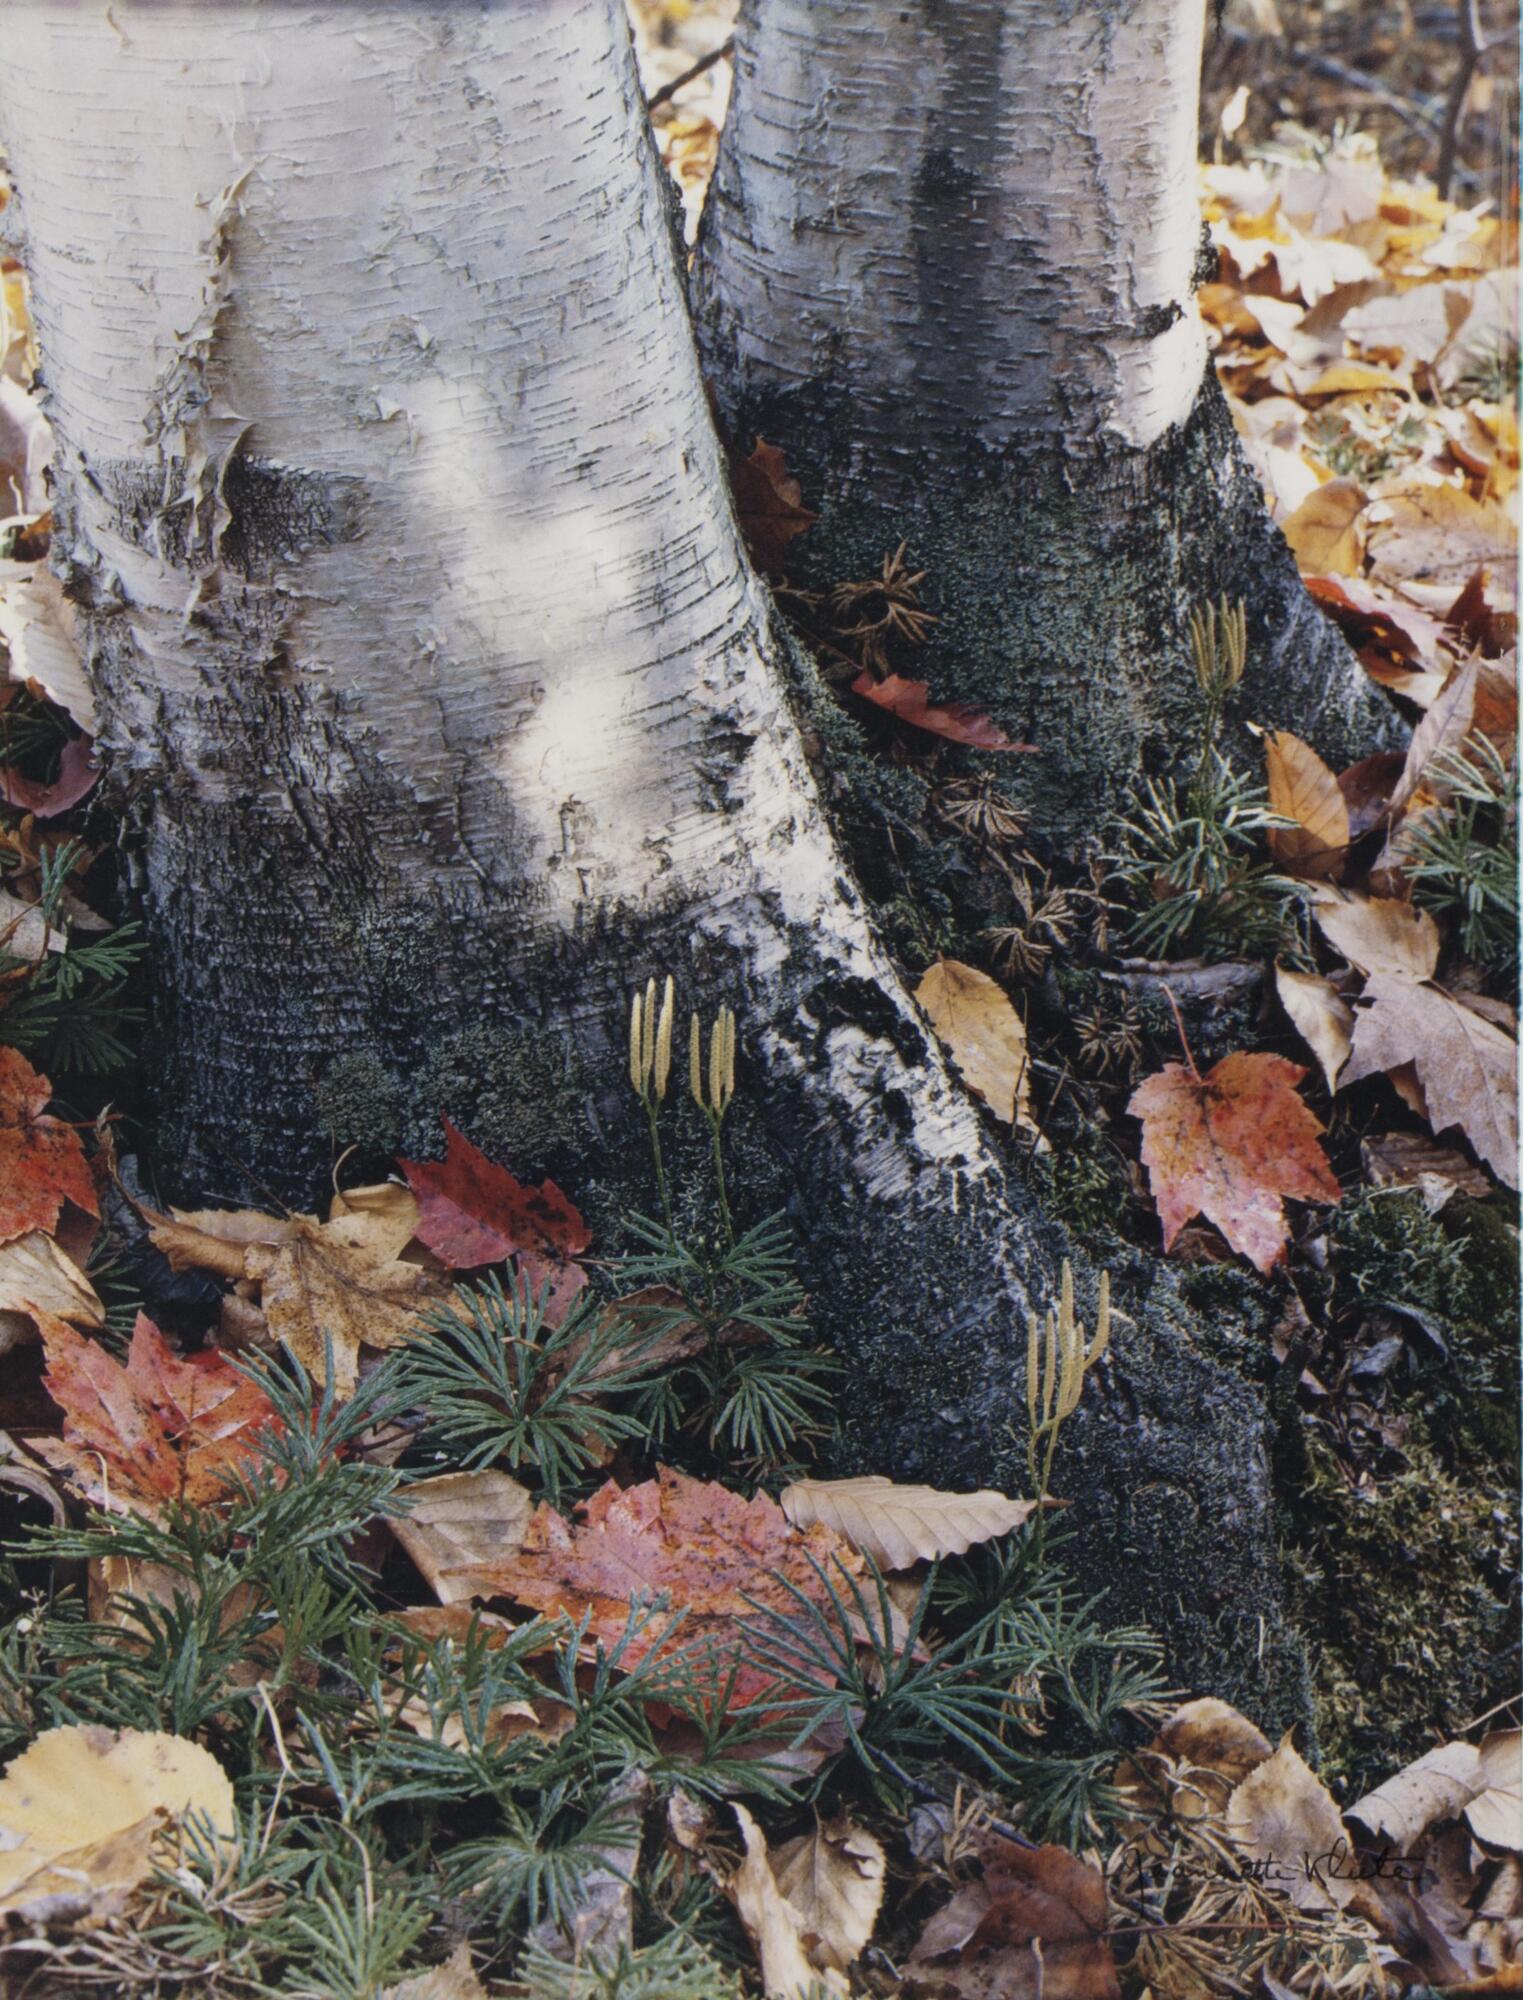 This is a color photograph of two birch trees, cropped near their base. Green ground-pines grow around them through the fallen red and brown leaves on the forest floor.